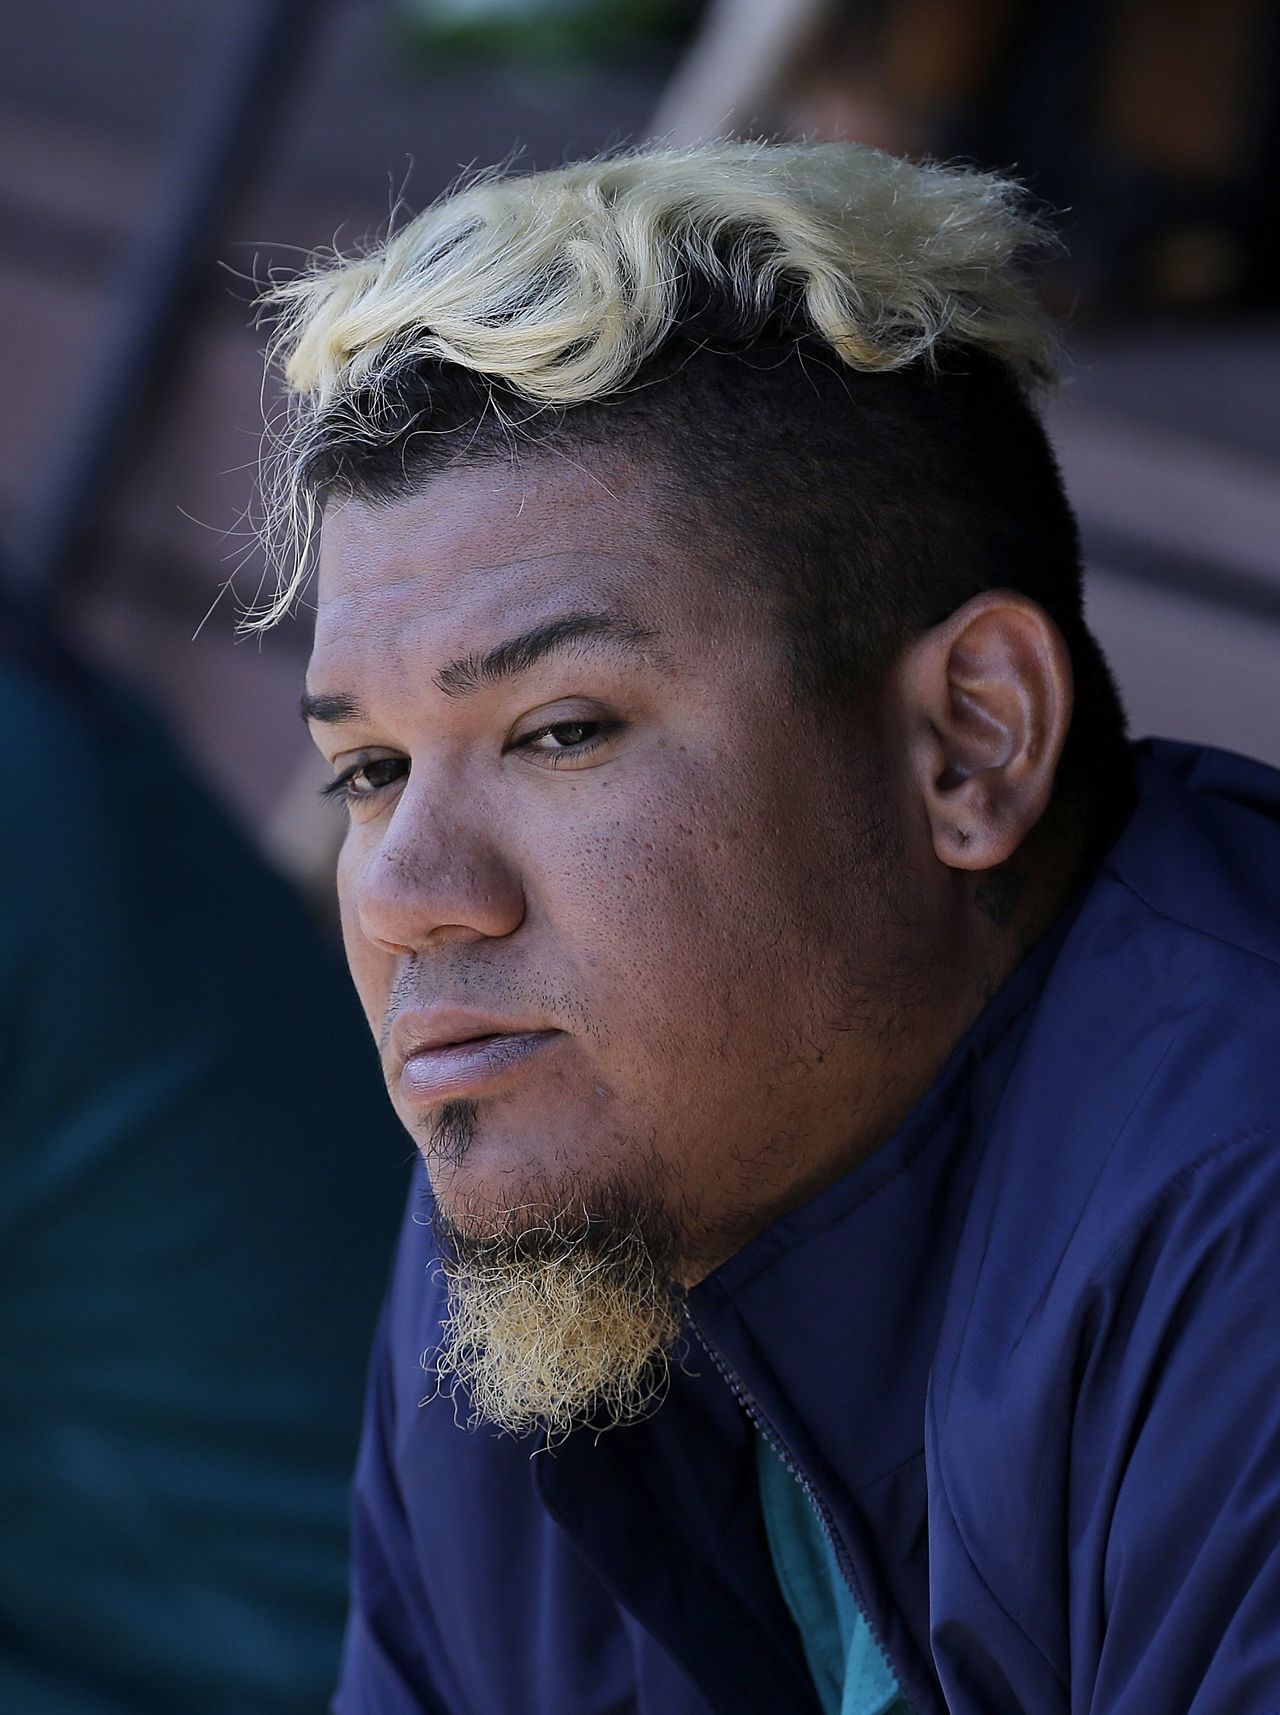 Mariners starting pitcher Felix Hernandez has pitched 13 innings this season and has allowed just four hits and one run, but is 0-1.